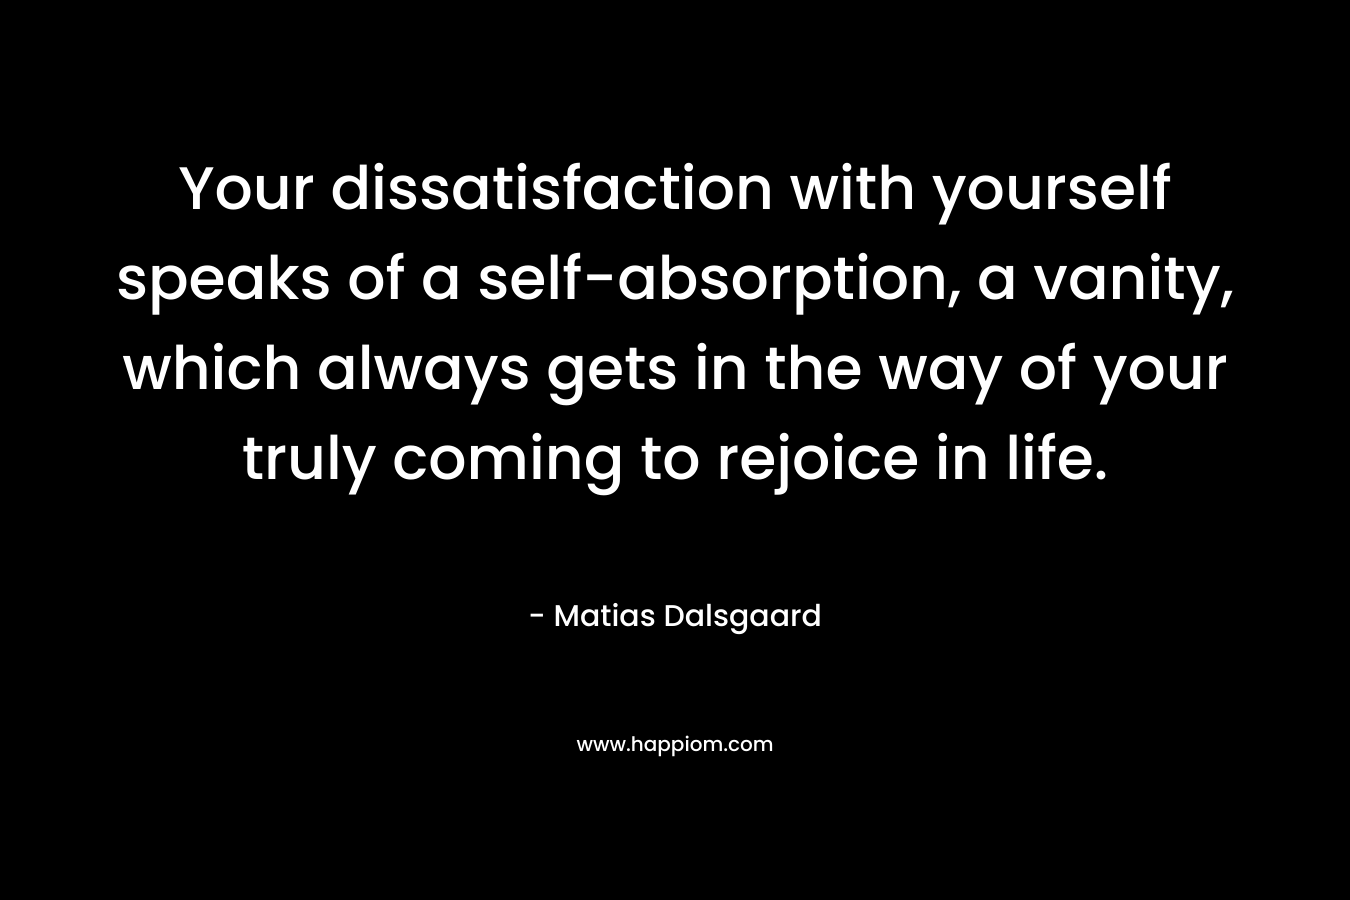 Your dissatisfaction with yourself speaks of a self-absorption, a vanity, which always gets in the way of your truly coming to rejoice in life. – Matias Dalsgaard